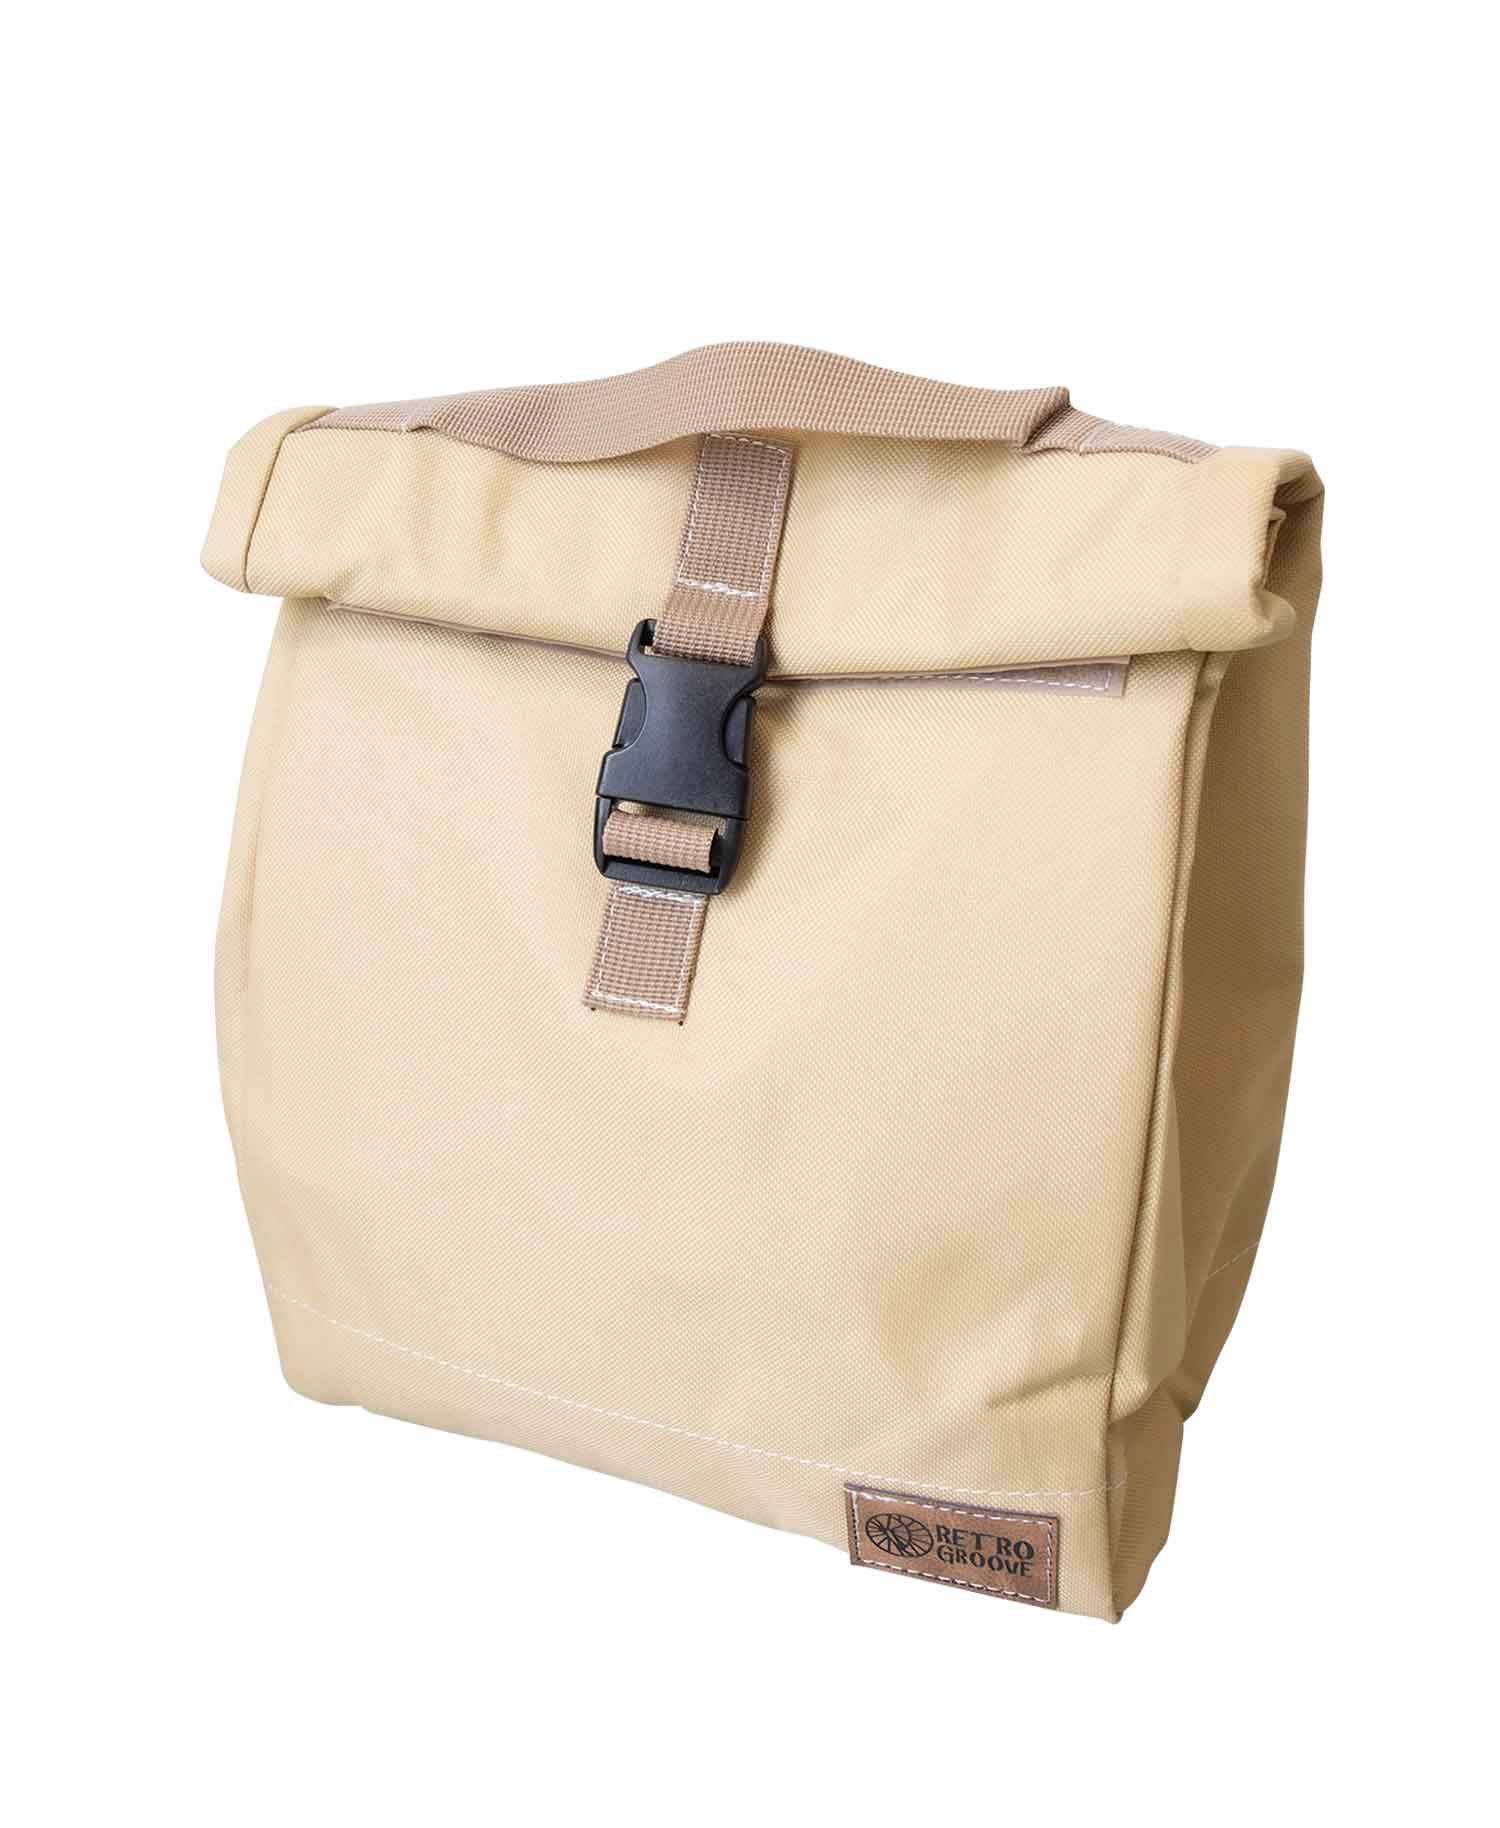 RETRO GROOVE ROLL DOWN LUNCH BAG